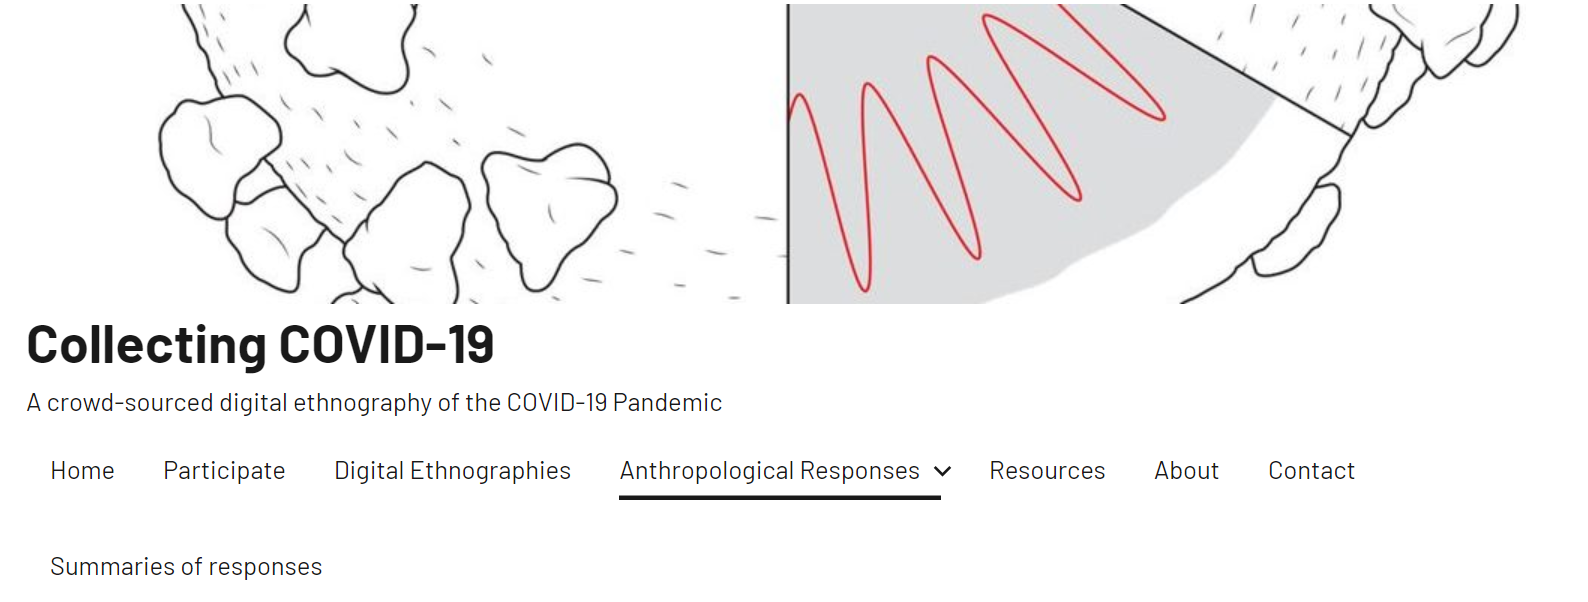 A crowd-sourced digital ethnography of the COVID-19 Pandemic